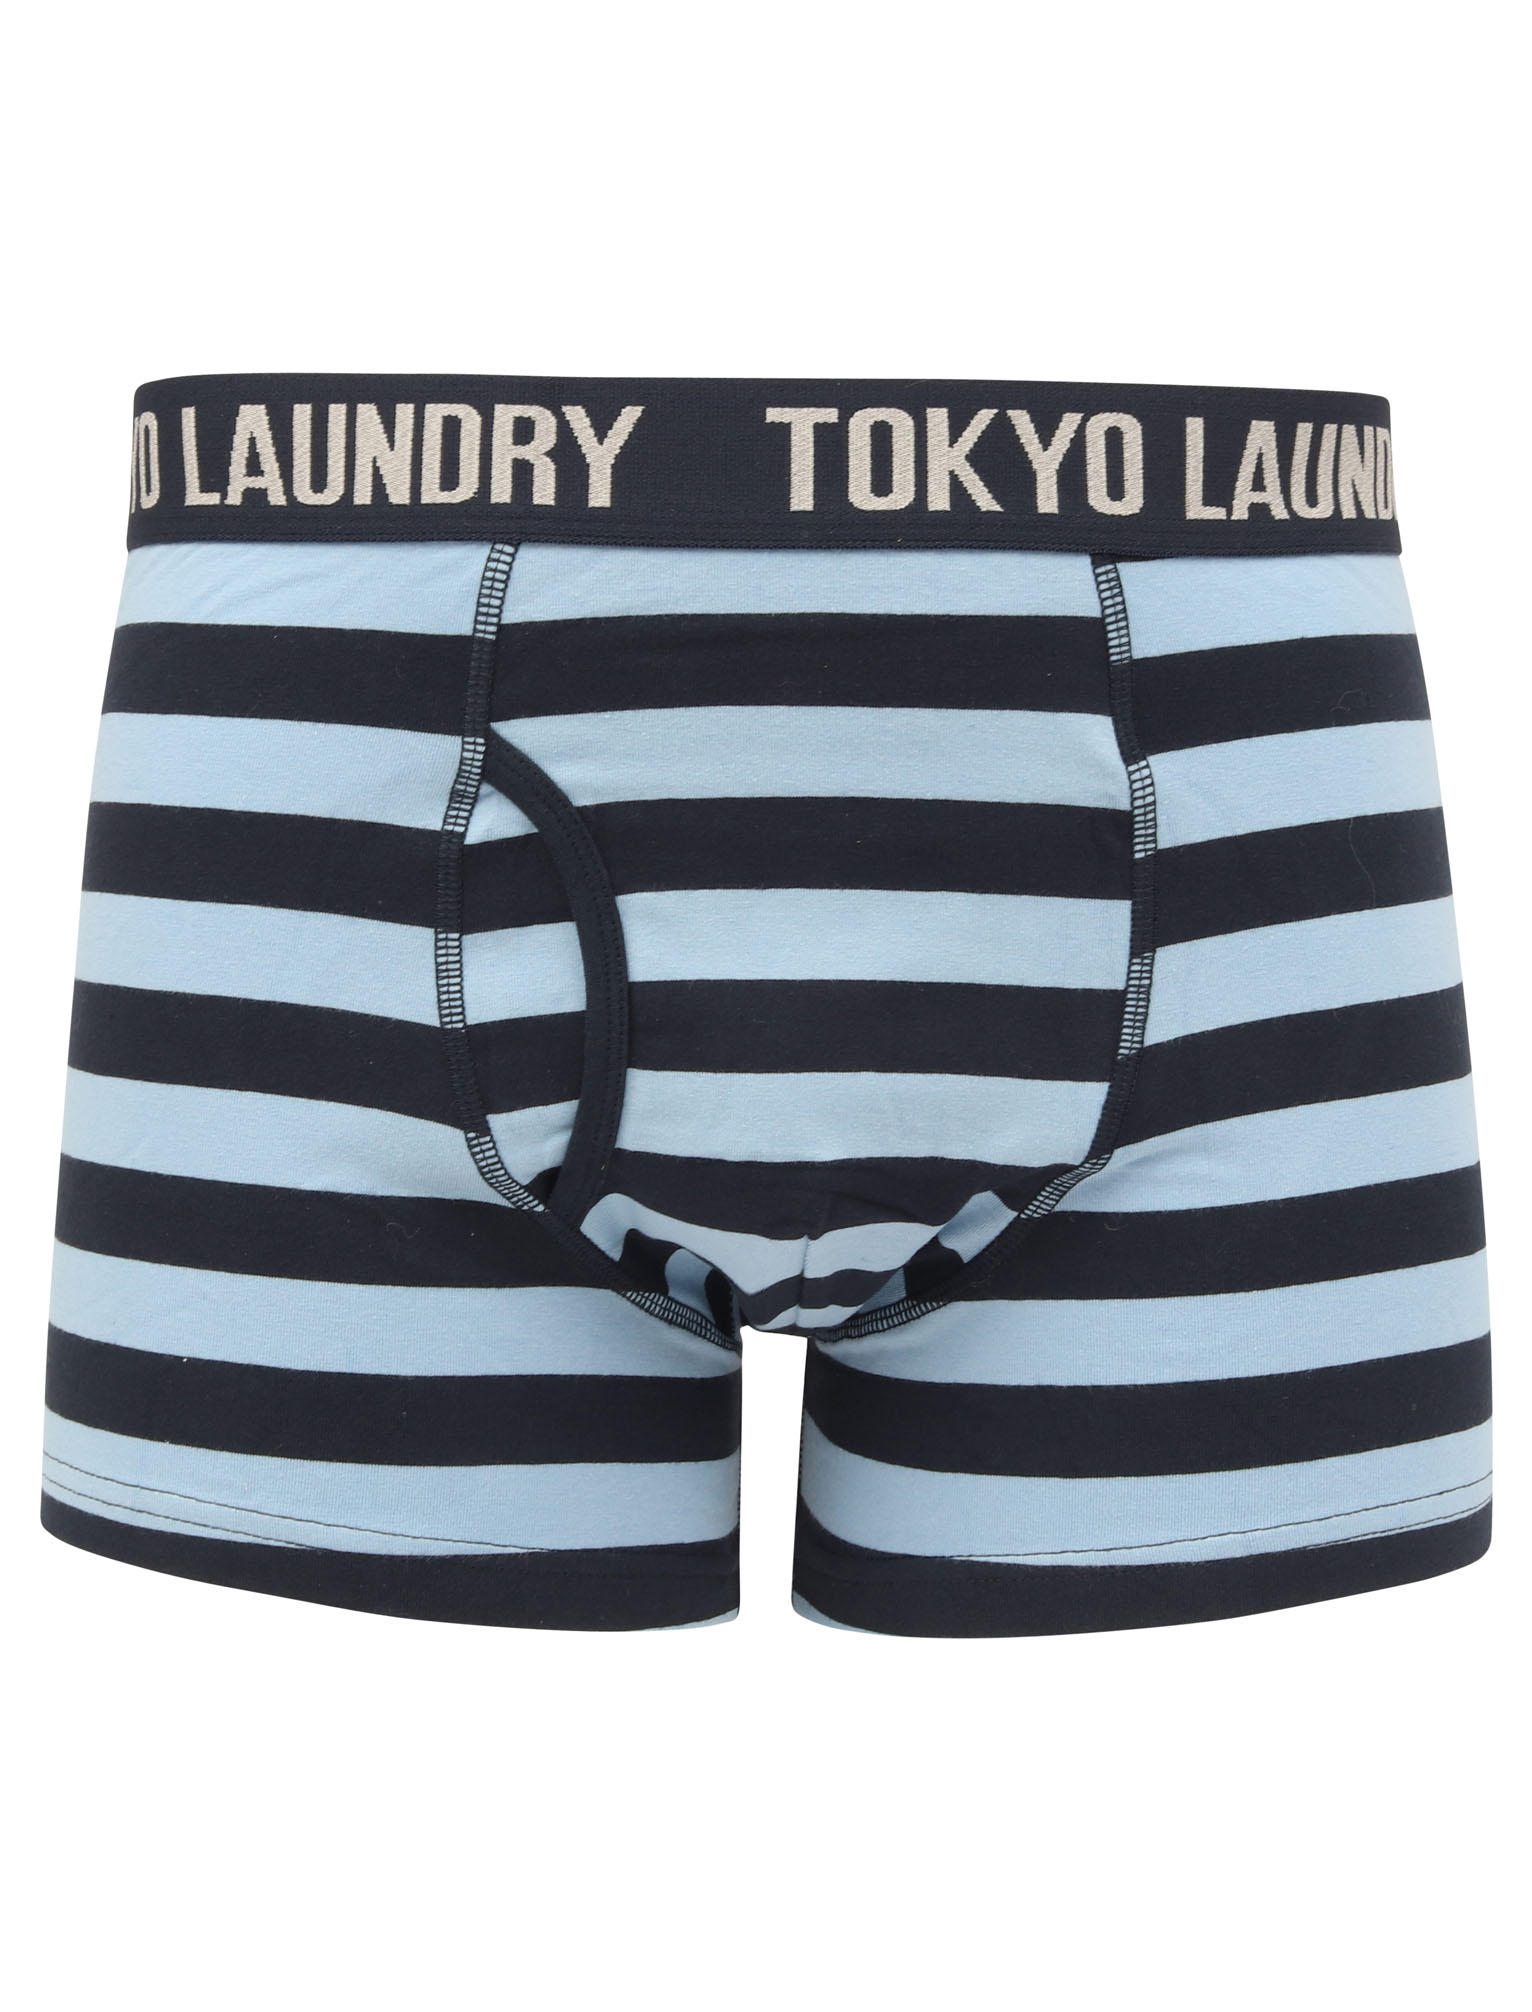 Tokyo Laundry Mens Striped Twin Pack Boxer Shorts 